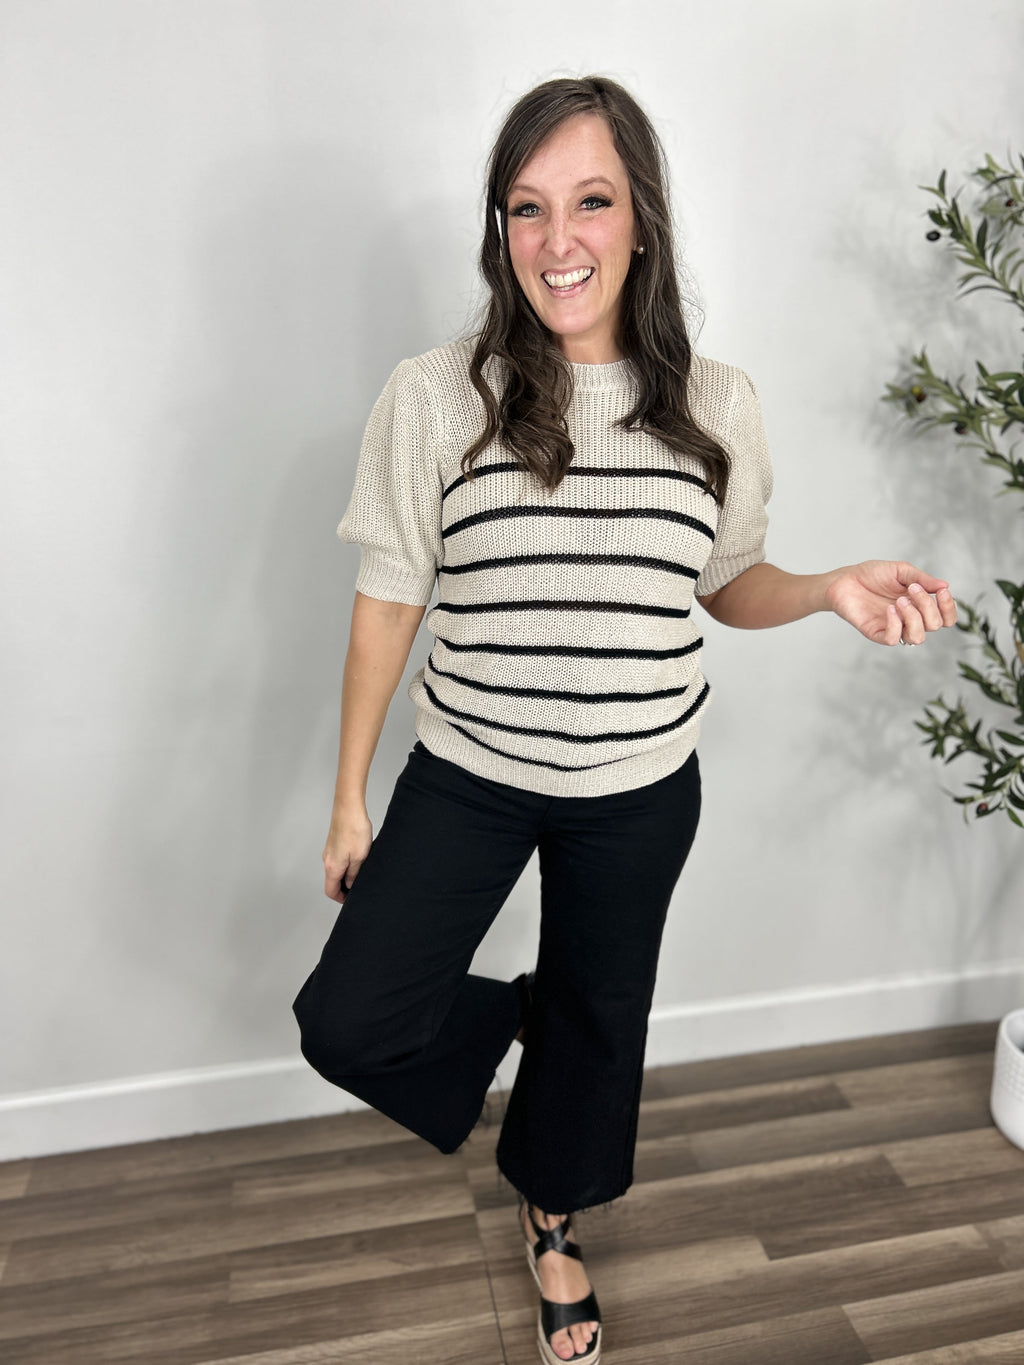 Women's taupe and white striped knit sweater top styled with black denim pants and black wedge sandals.